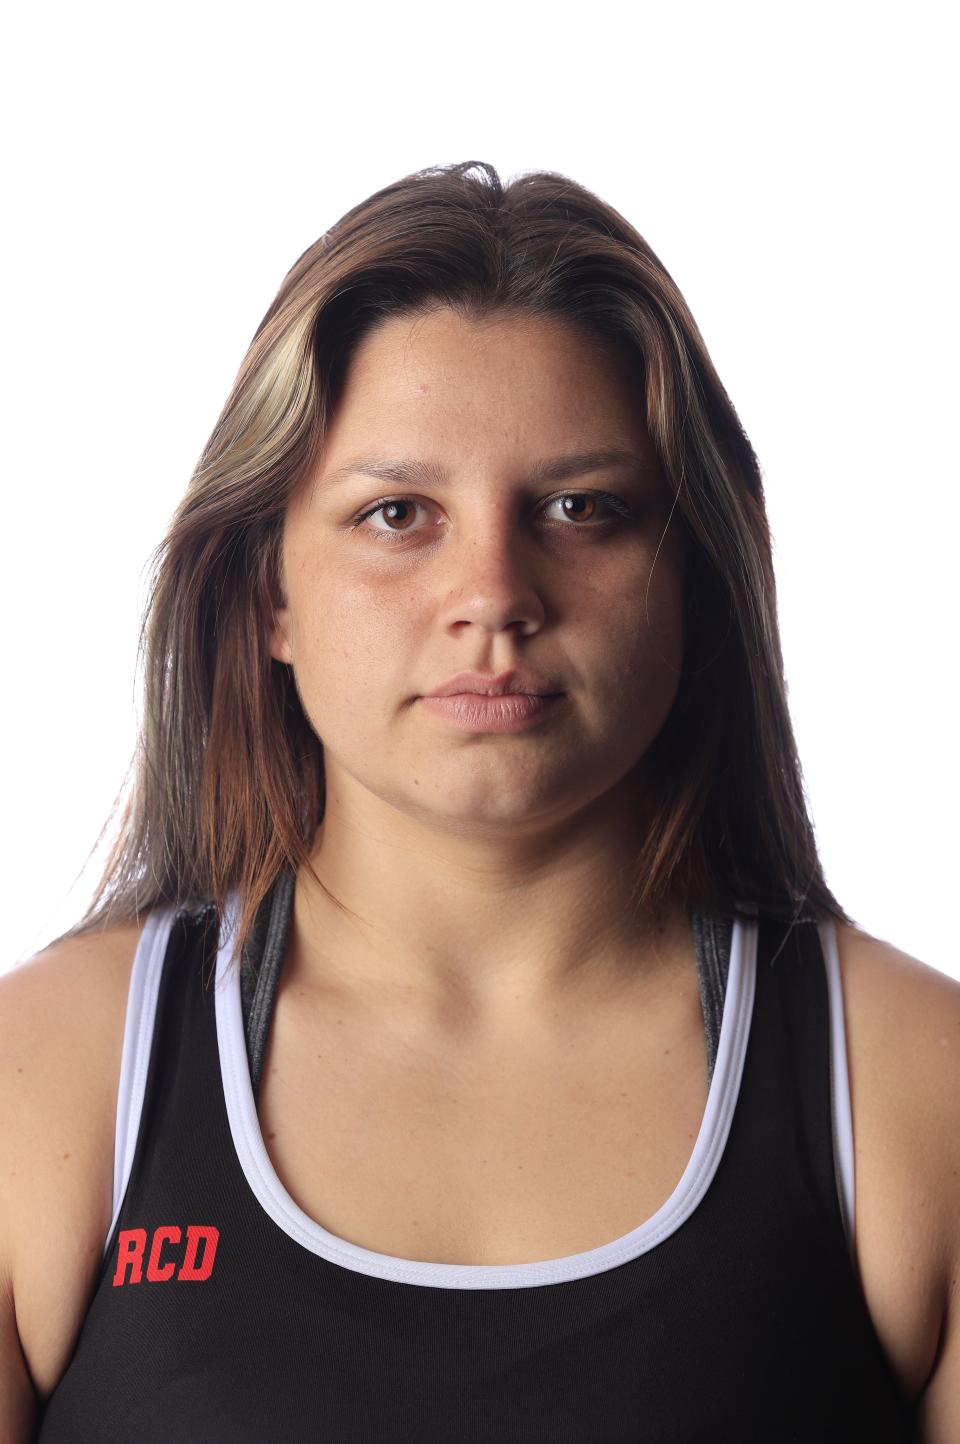 Middleburg's Cheyenne Cruce is the Times-Union's All-First Coast girls wrestler of the year for 2023-24 after her undefeated season and FHSAA championship.